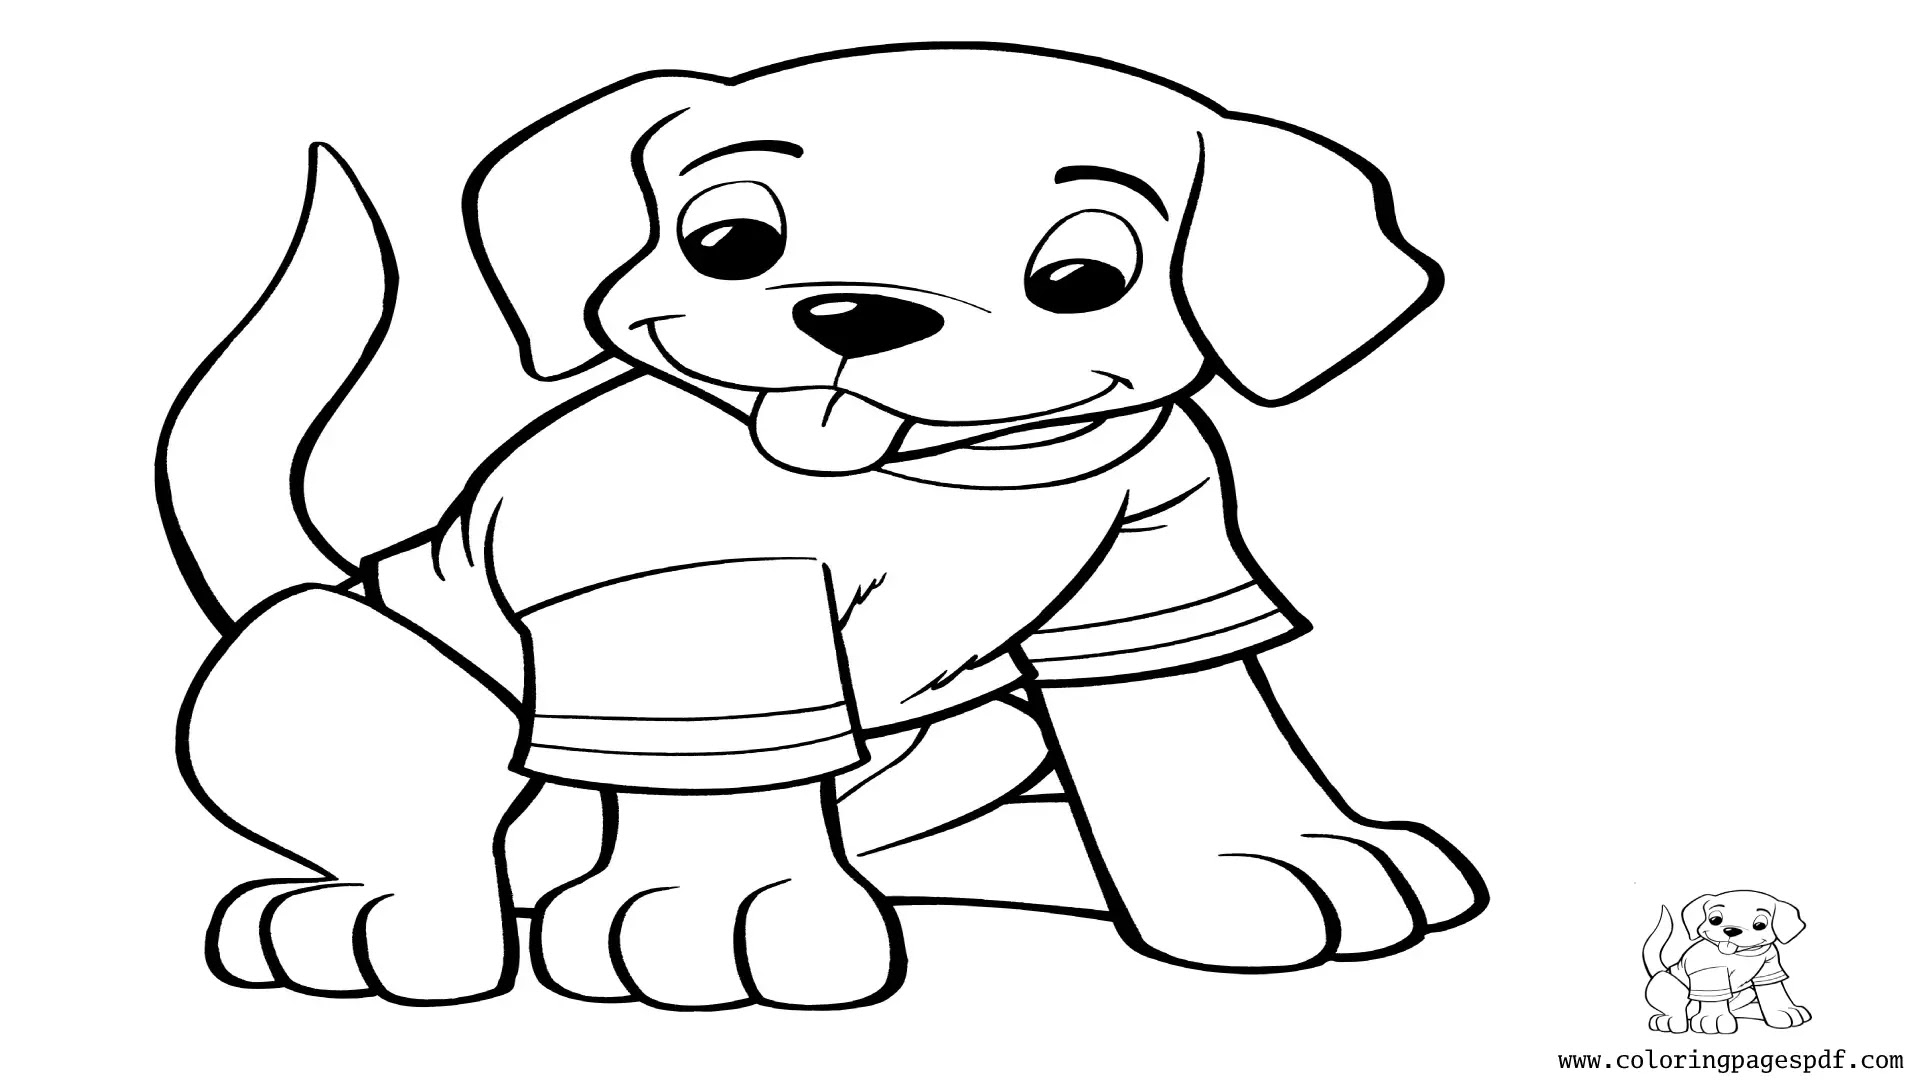 Coloring Pages Of A Puppy Wearing A Shirt